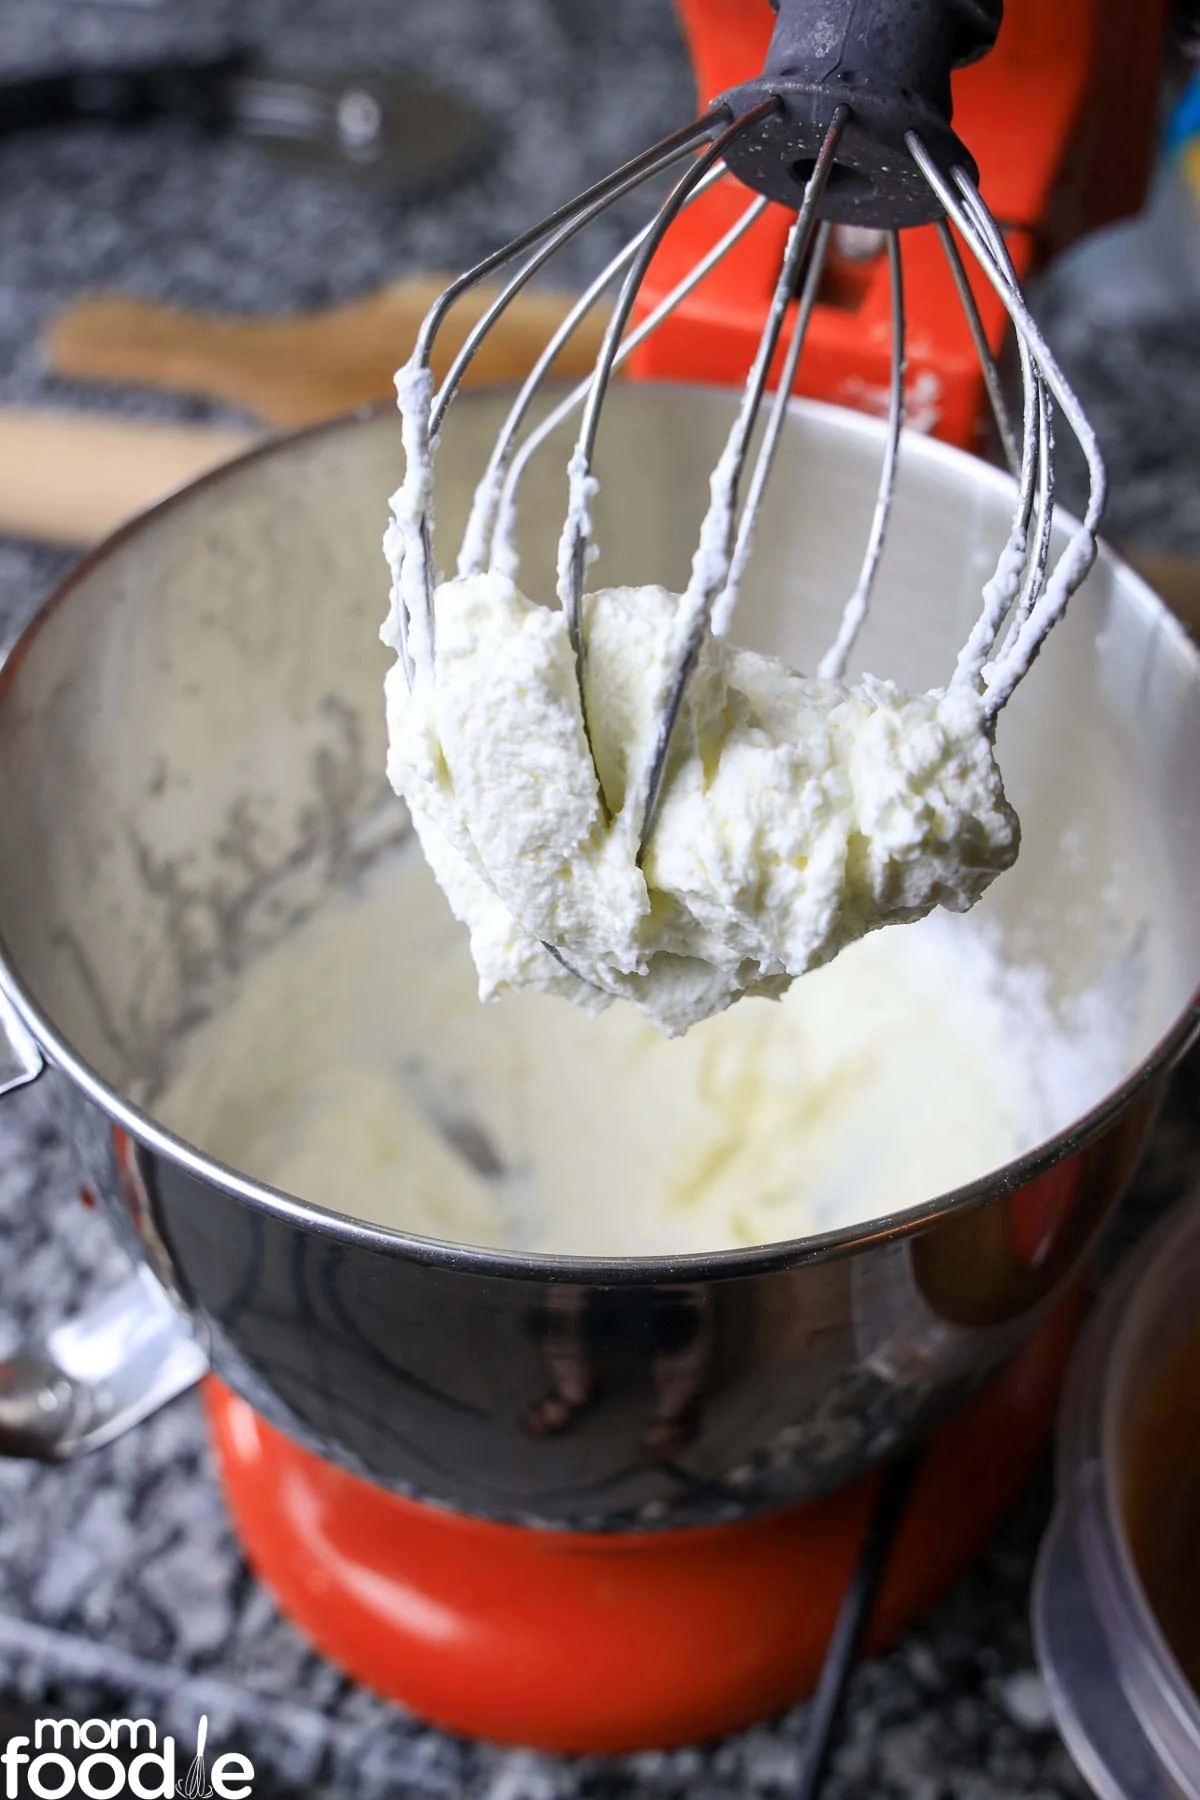 whipped cream in mixer